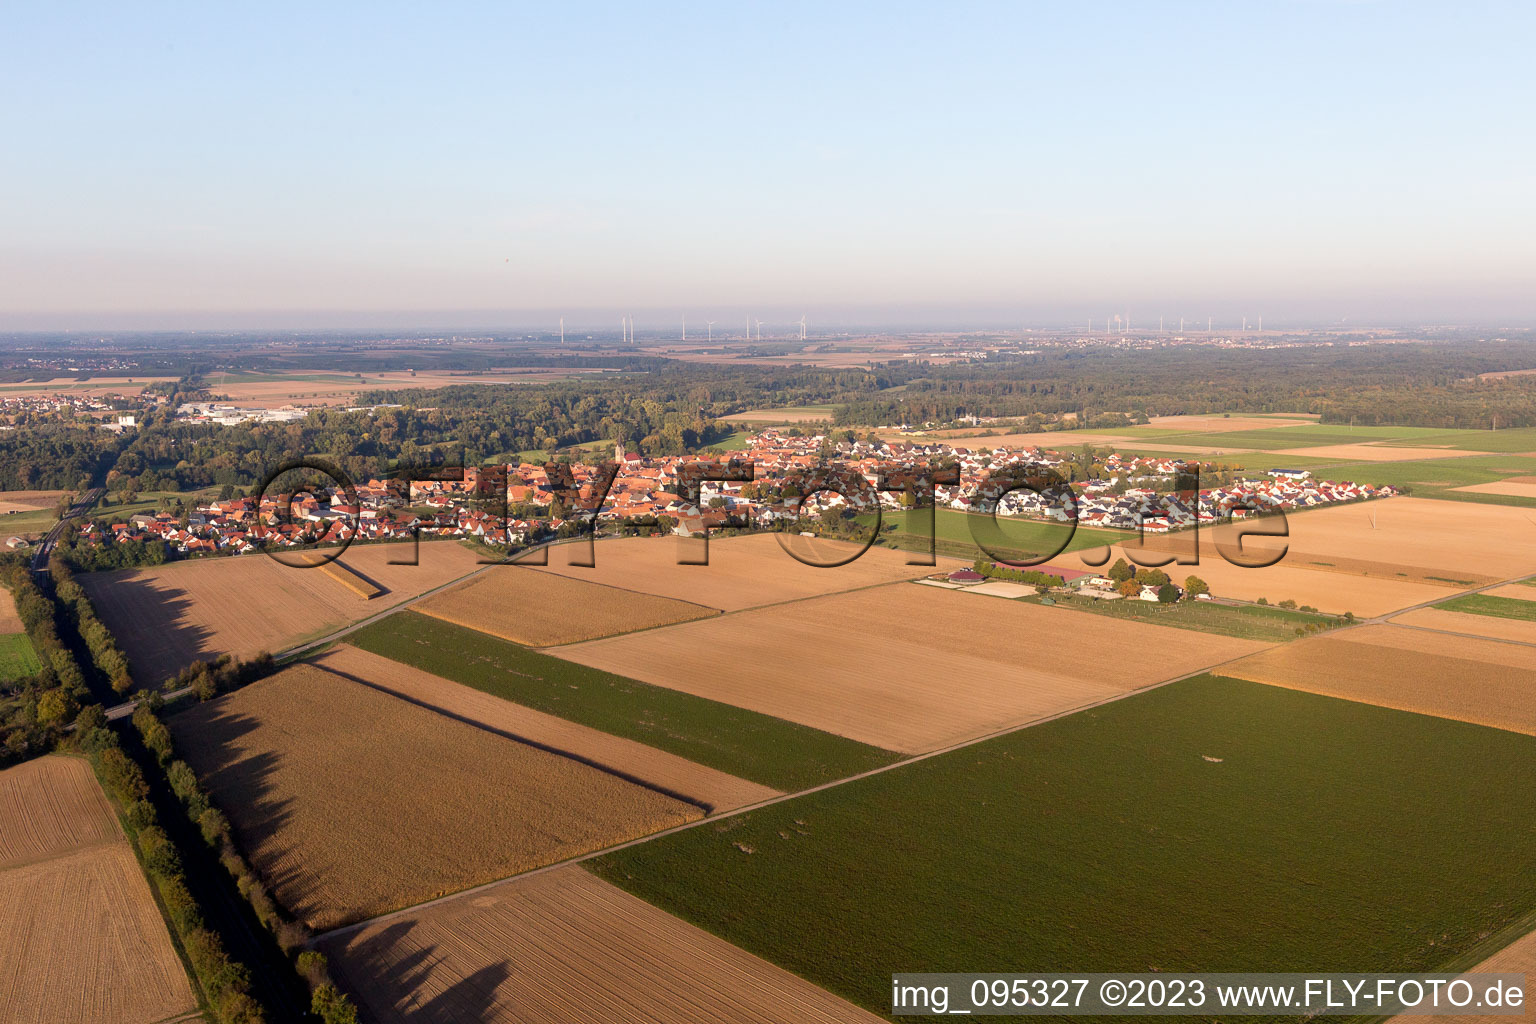 Drone recording of Steinweiler in the state Rhineland-Palatinate, Germany